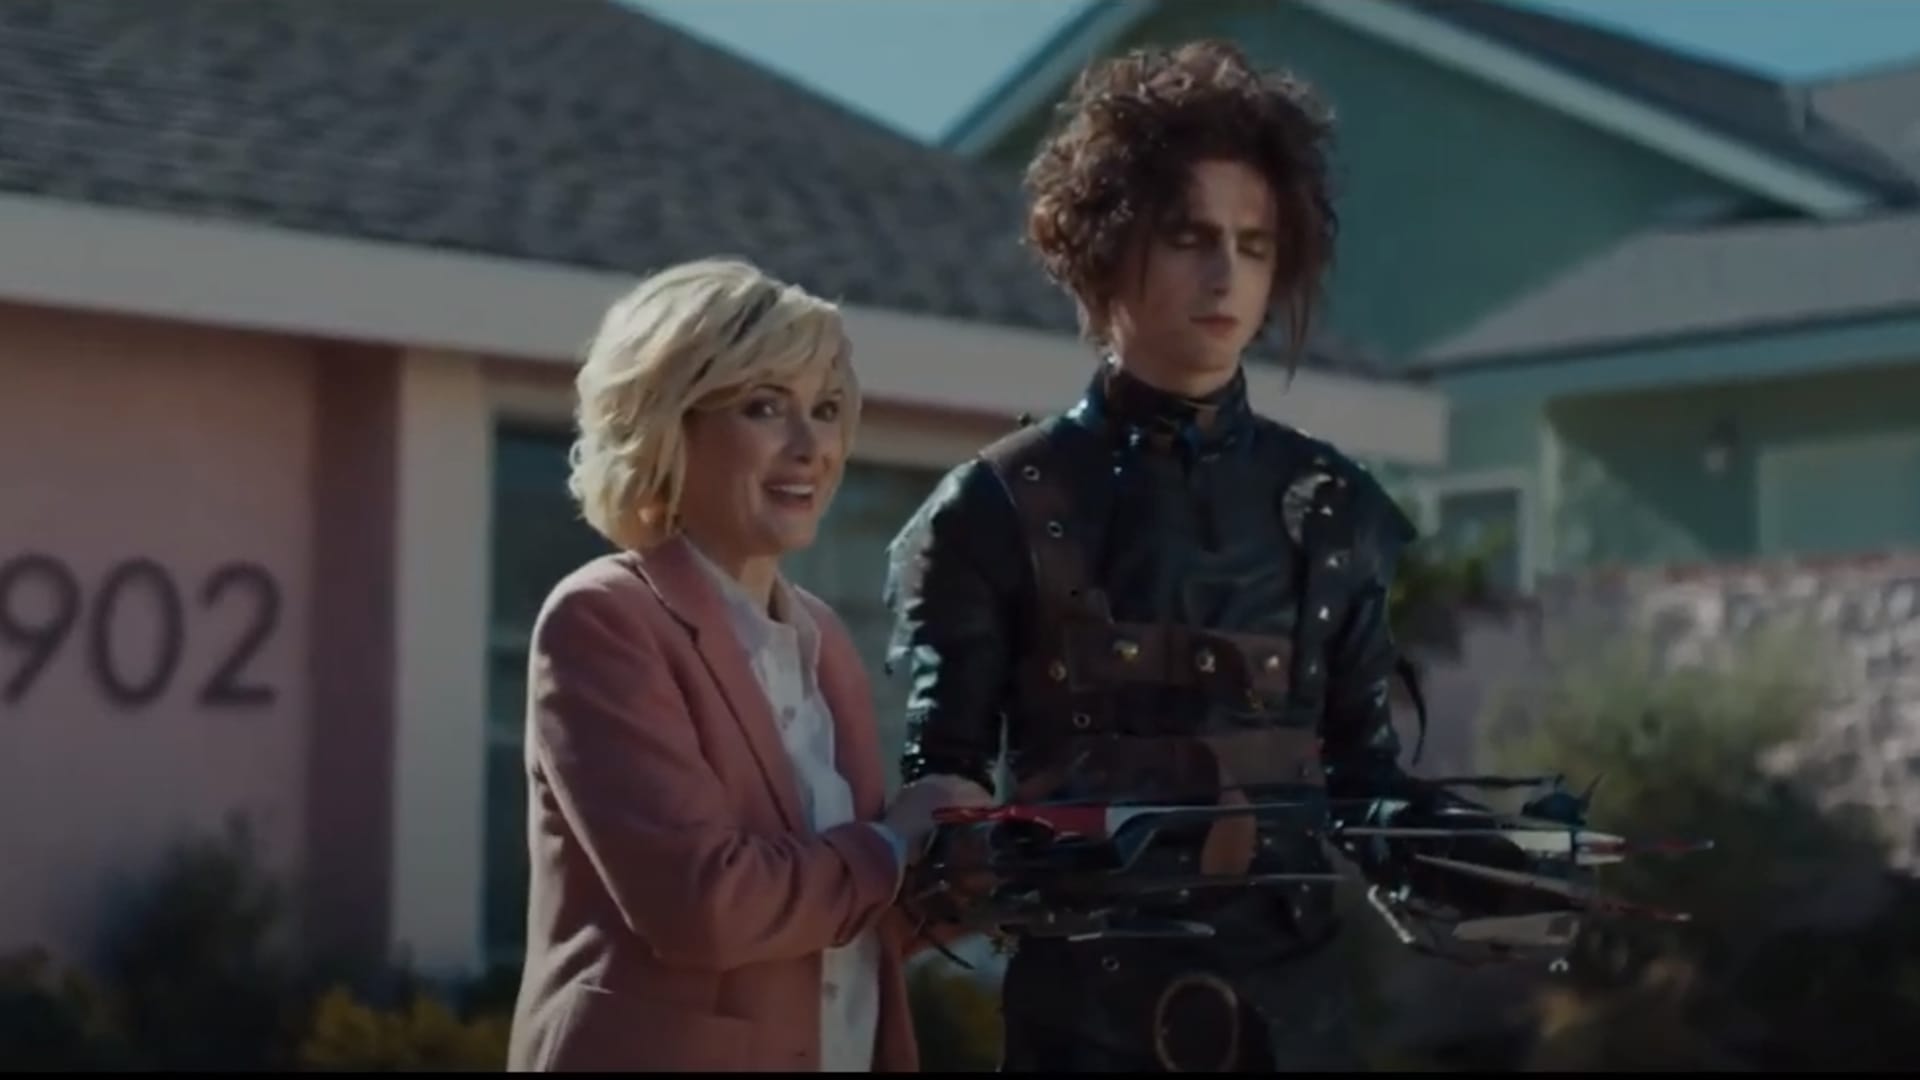 A 60-second Super Bowl ad for Cadillac stars Timothée Chalamet, as Edward Scissorhands's son, Edgar, and Winona Ryder, reprising her role as Kim, who is also Edgar's mother.